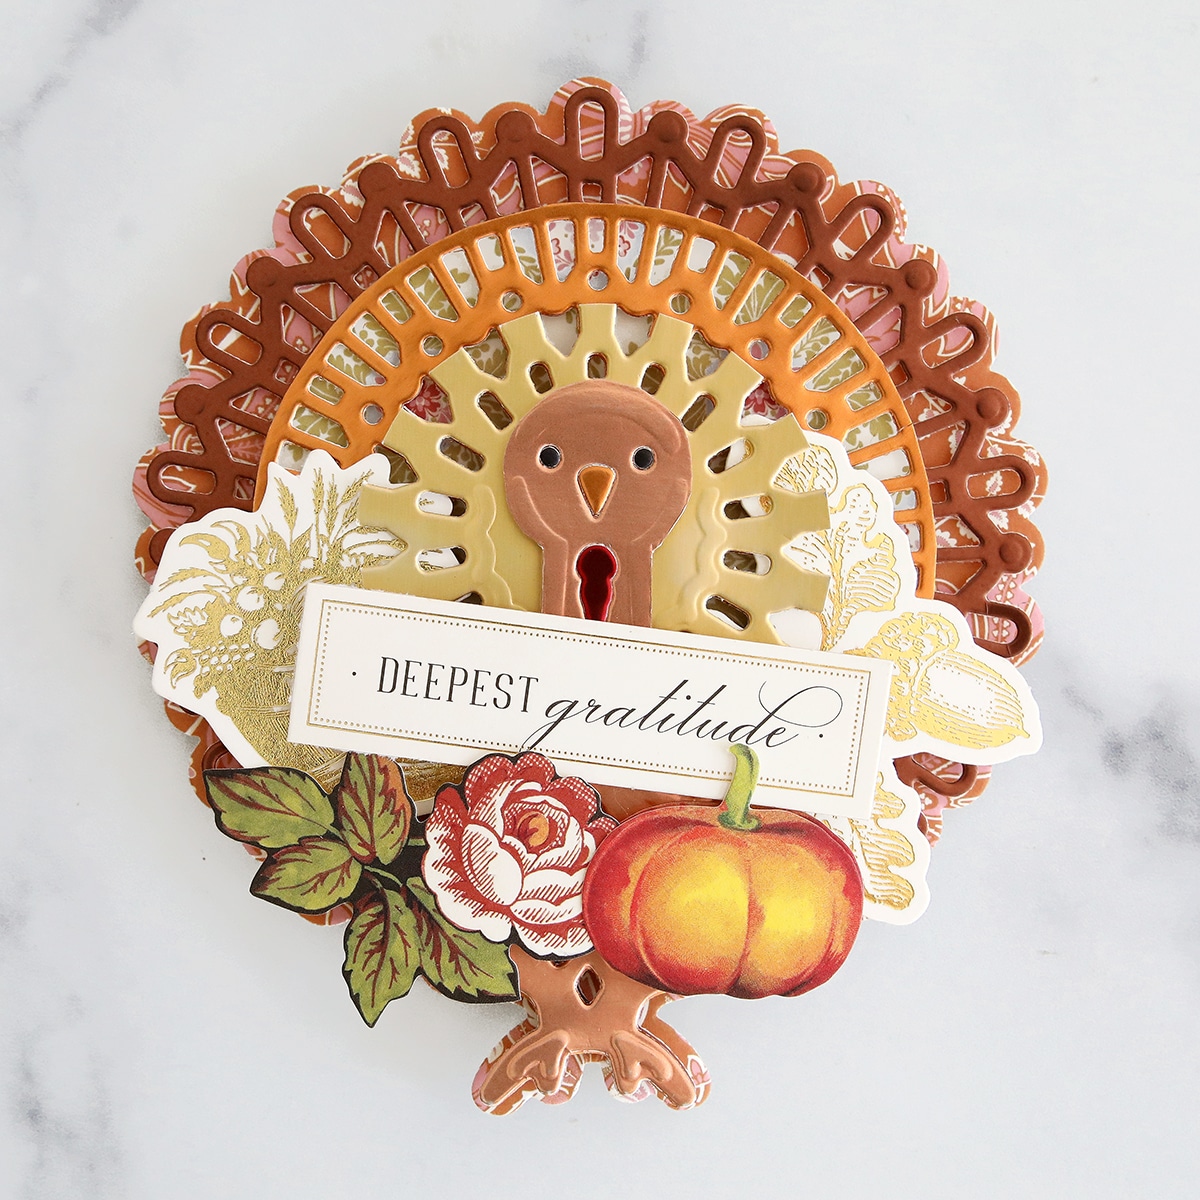 A card with a turkey and flowers on it.